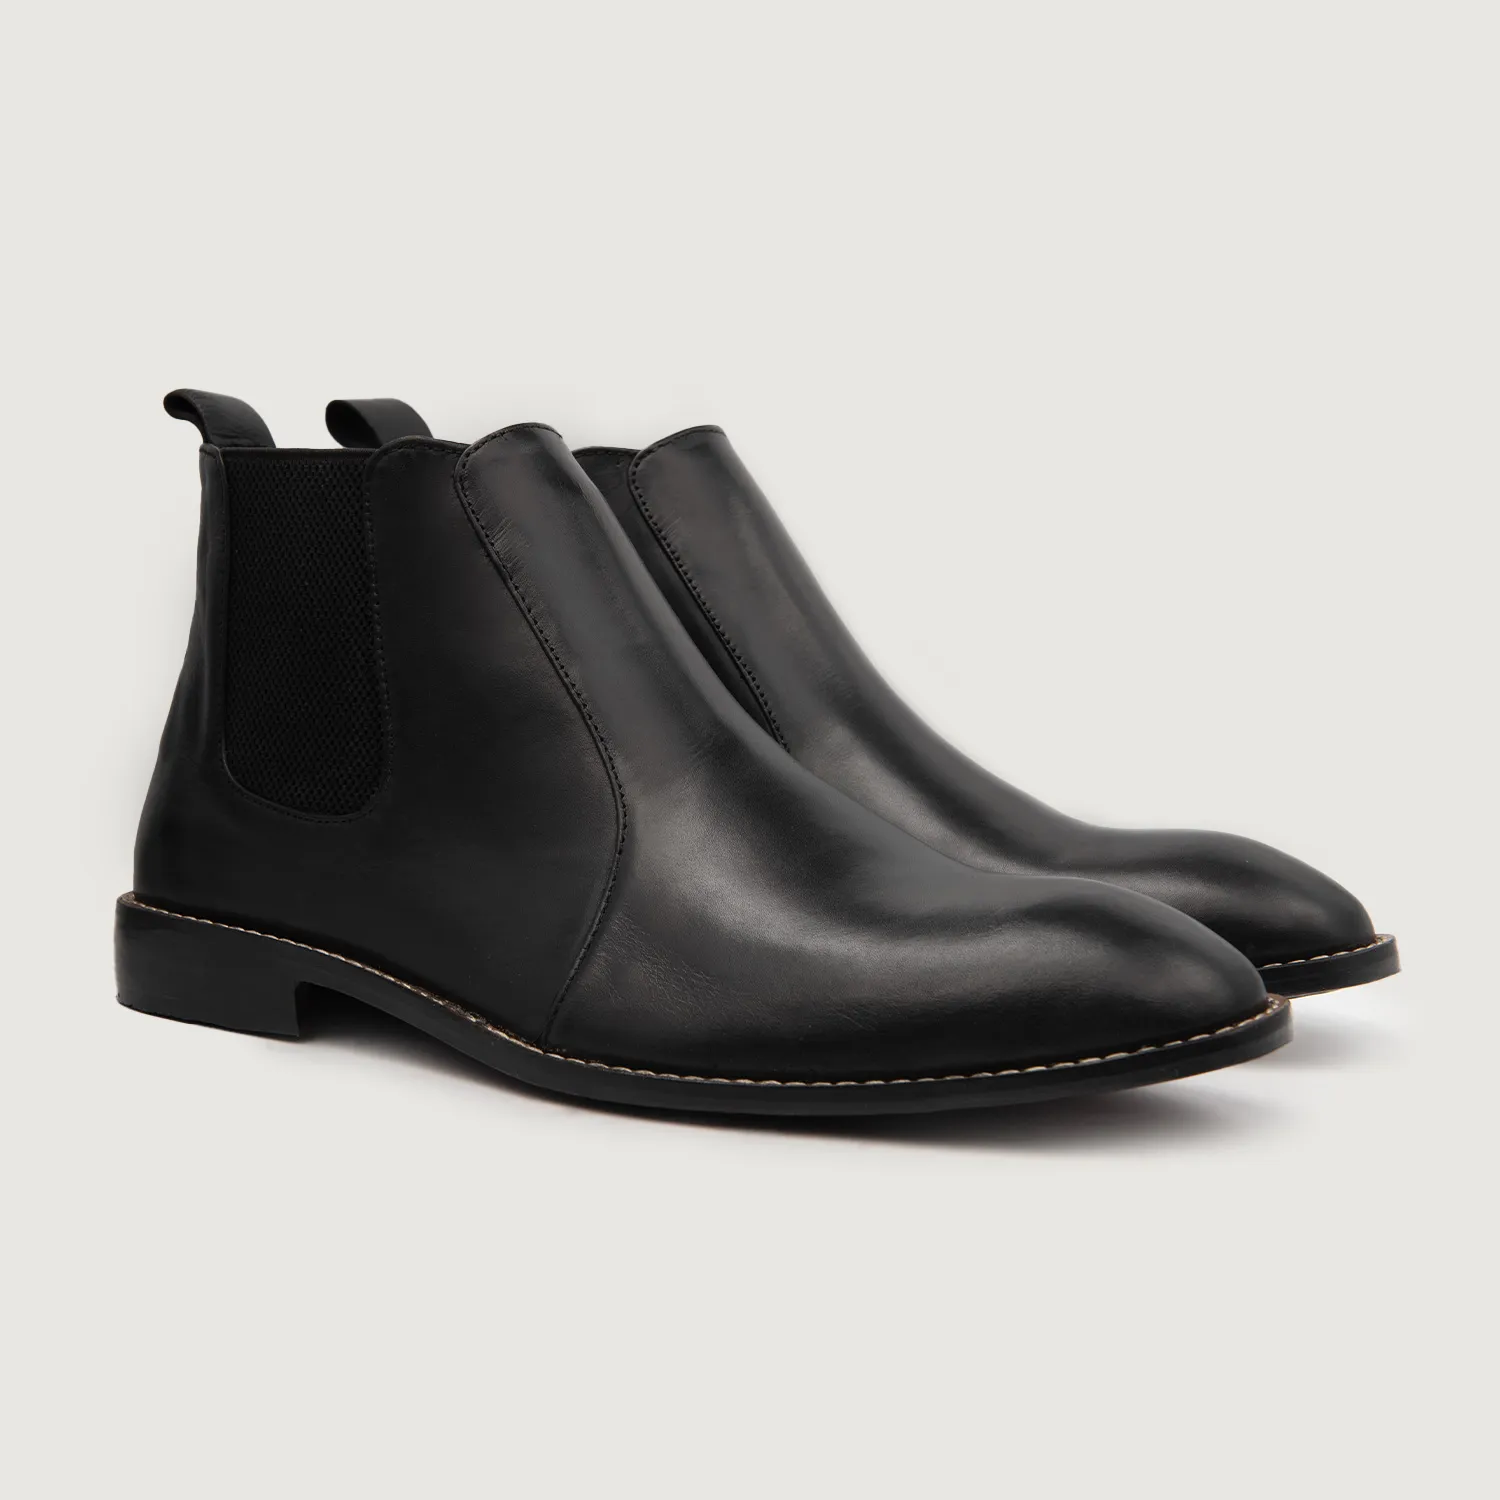 Chelsea Boots For Halloween Costume